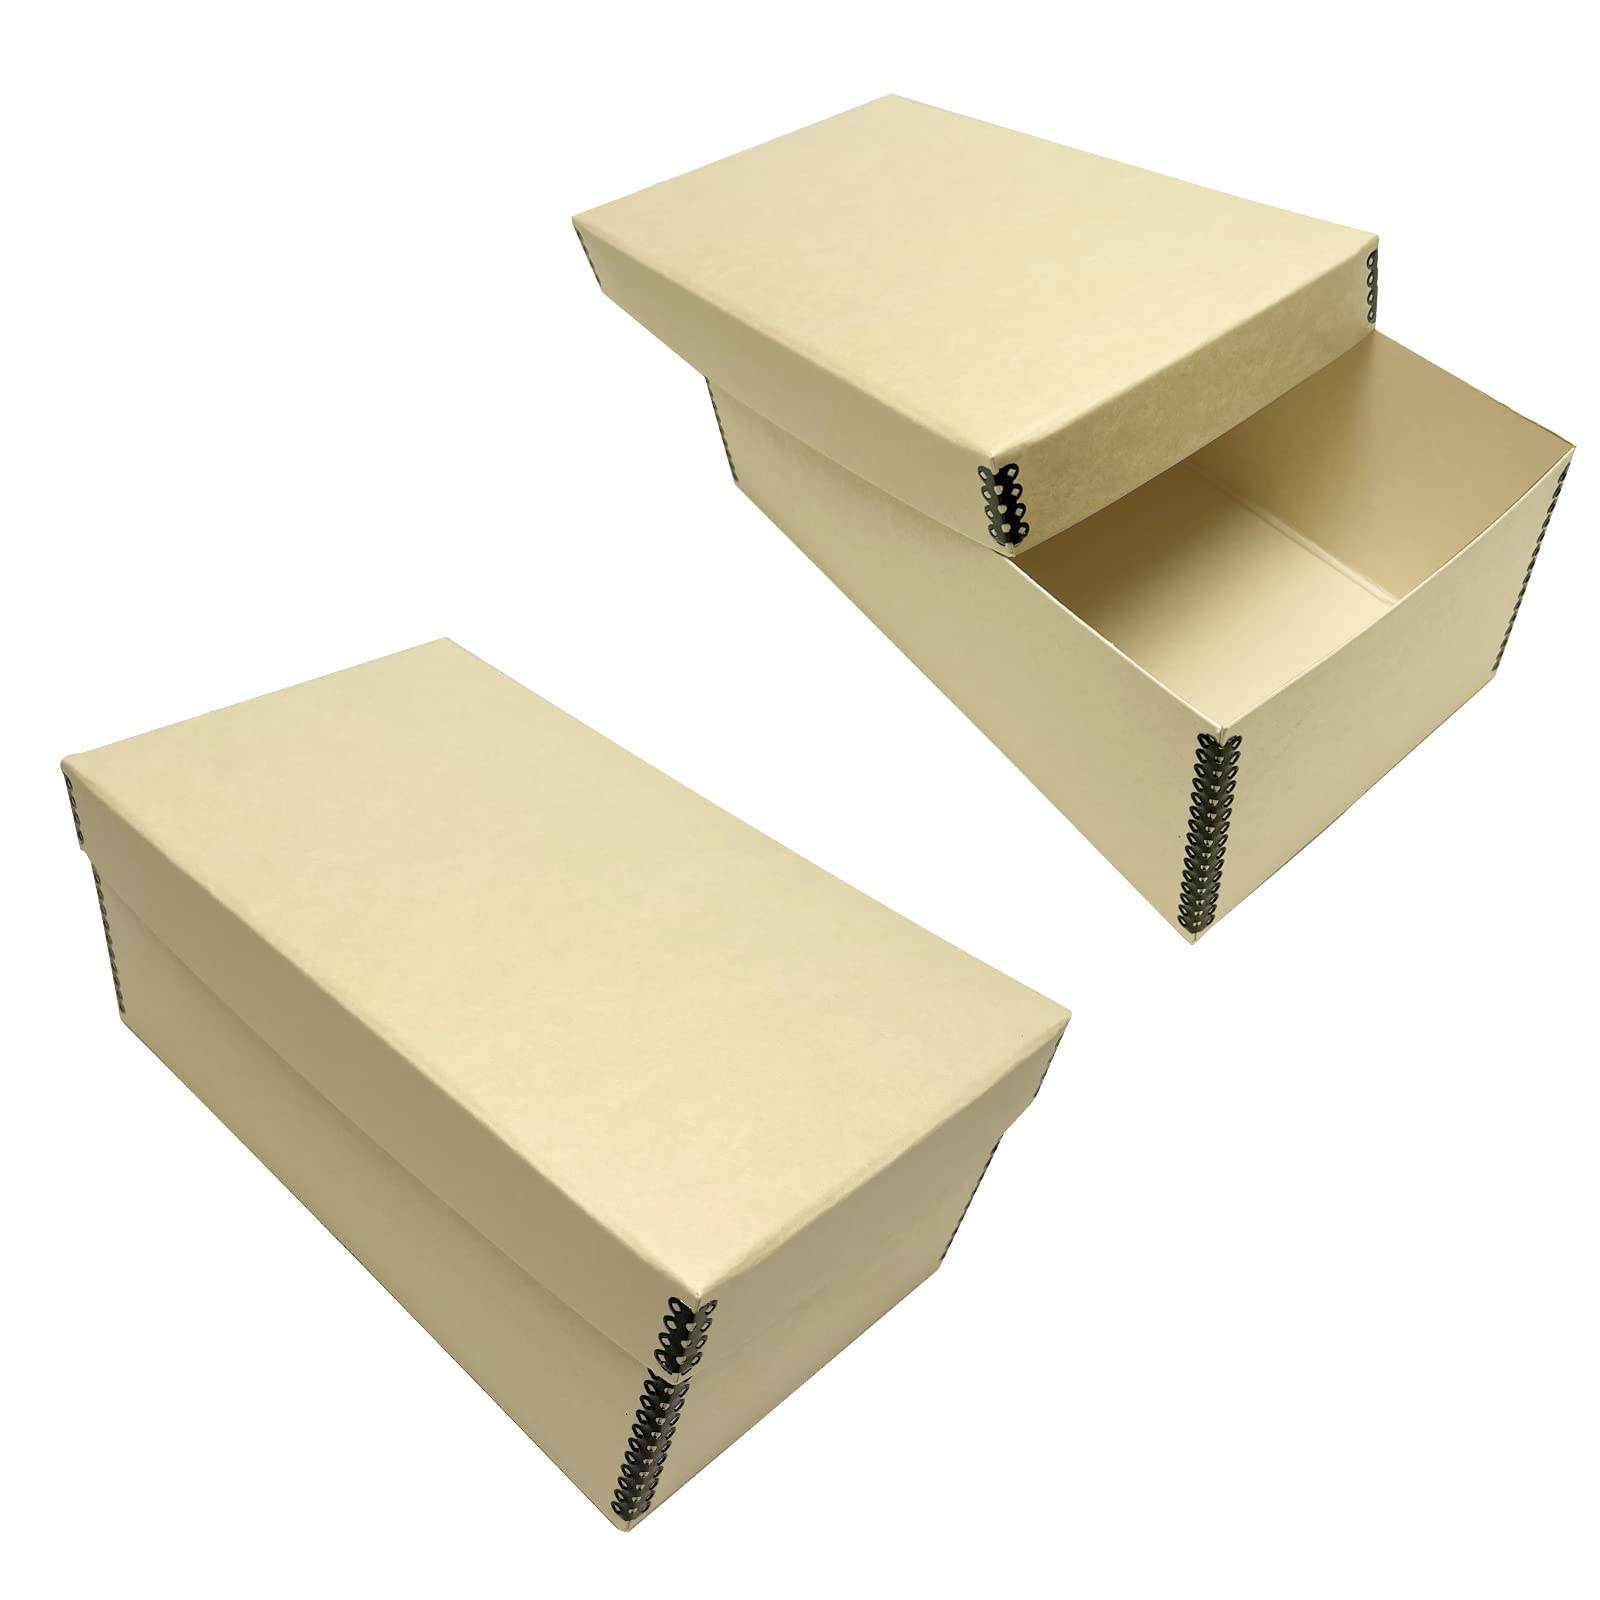 Lineco Tan Photo Storage Box 5x7x12 Inches with Clamshell Design